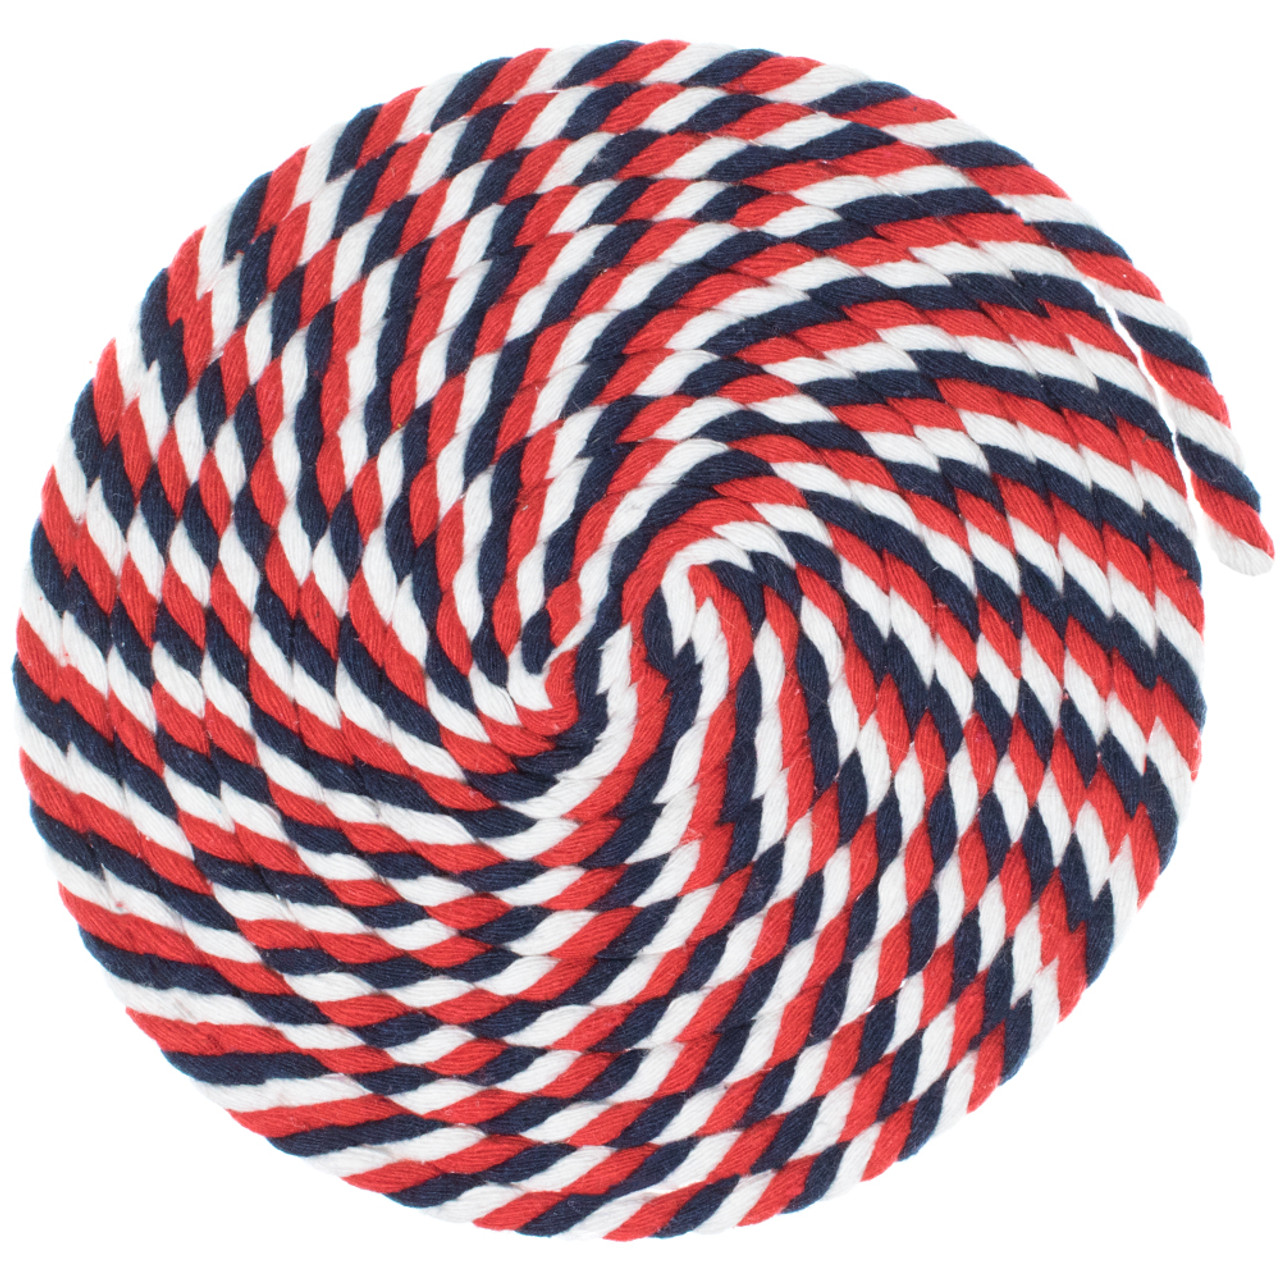 1/4 inch Twisted Cotton Rope